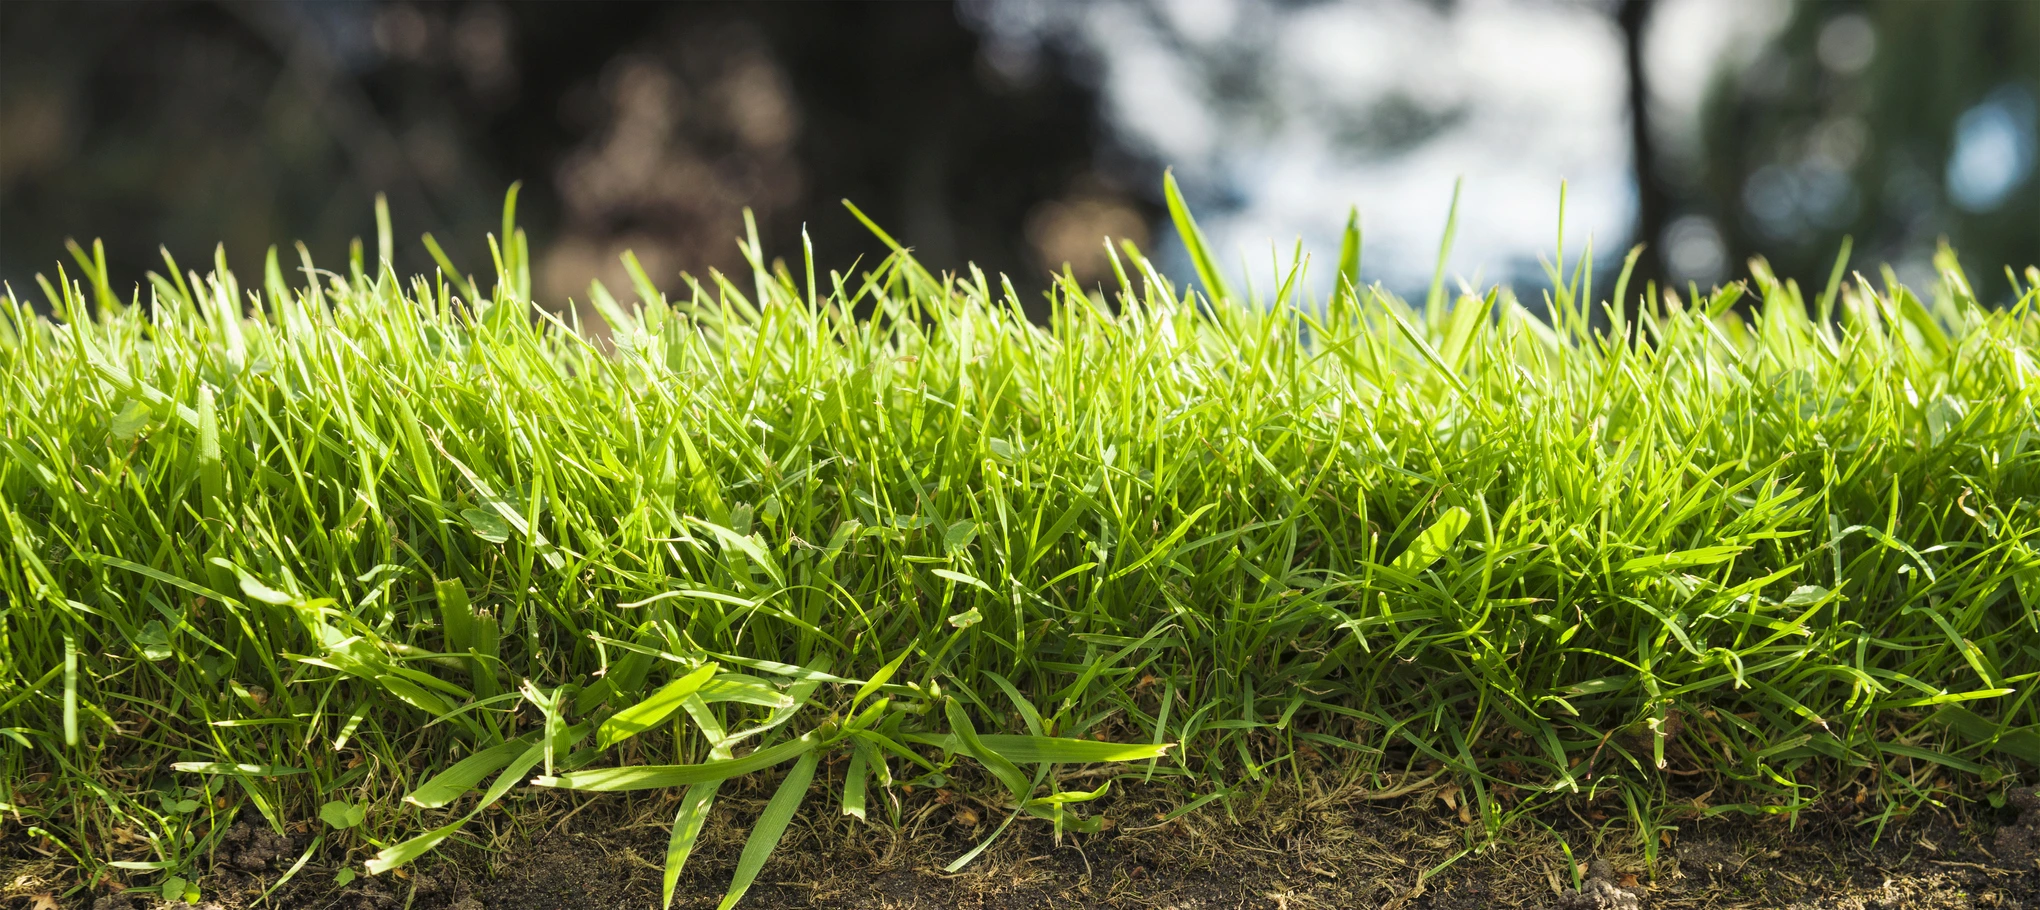 Achieve a lush green lawn with Sod by Sources Inc.